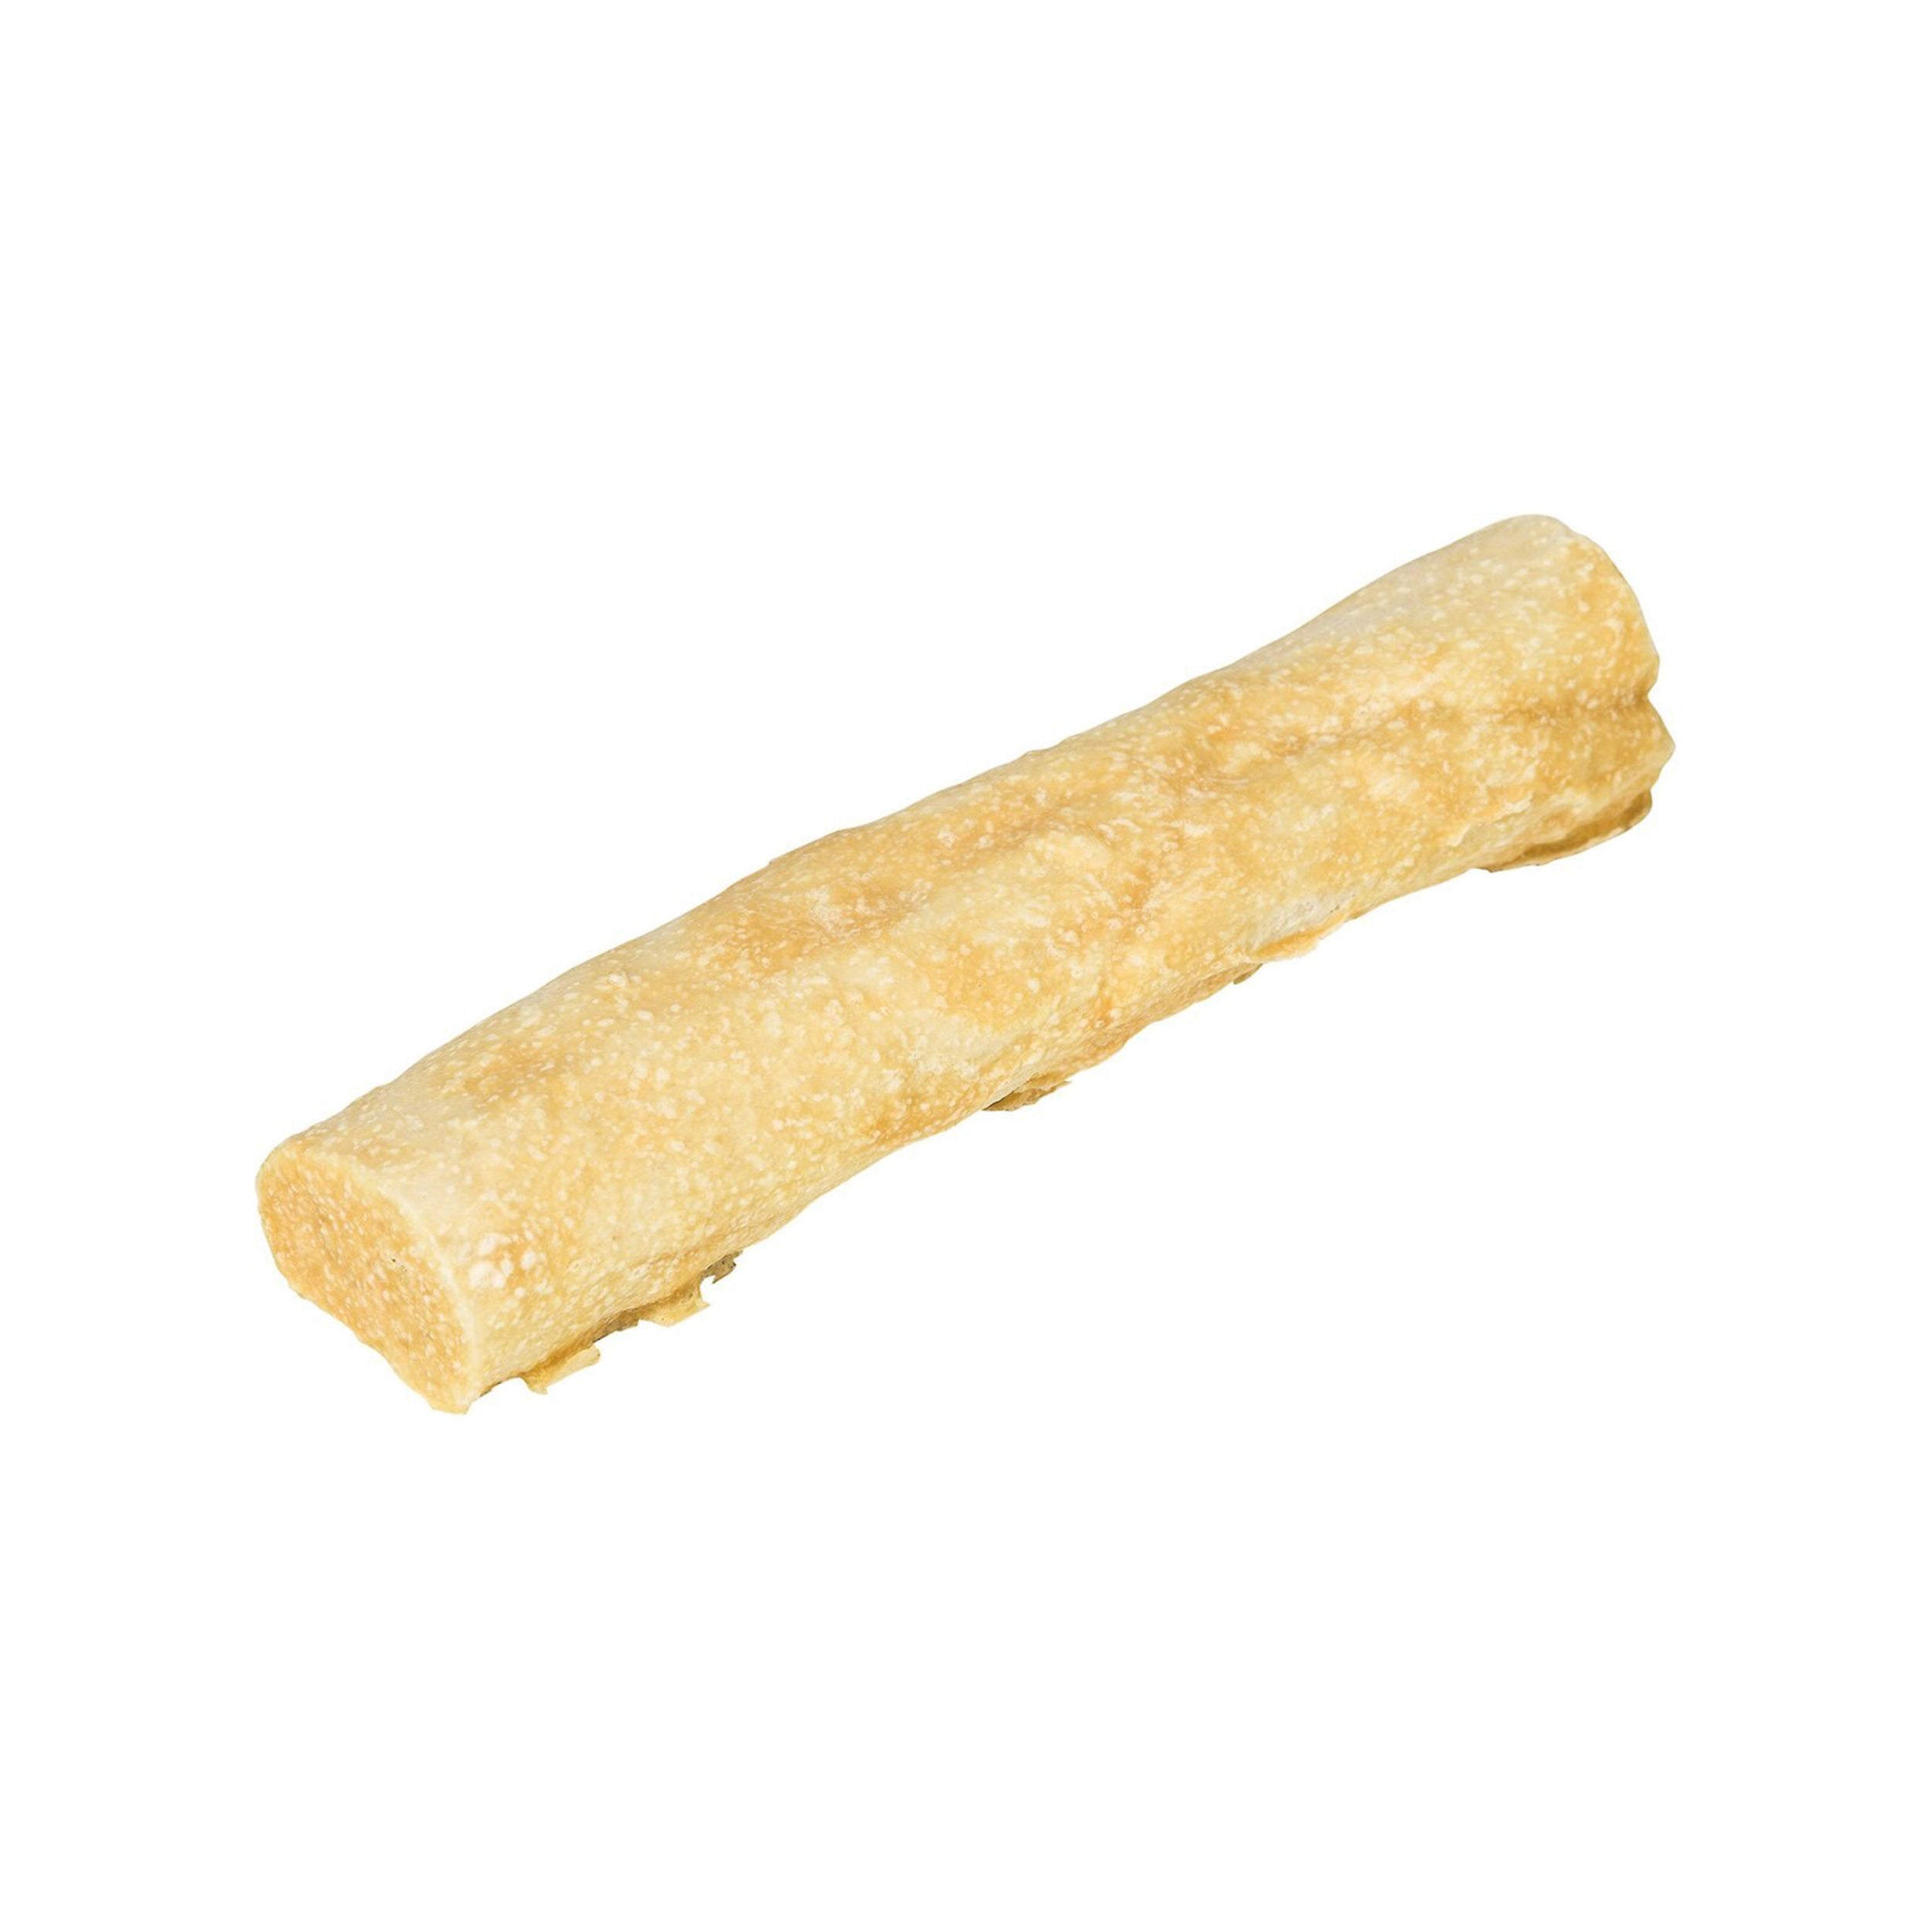 Fieldcrest Farms Nothin' To Hide Rawhide Alternative Small Roll 5" Natural Chew Dog Treats